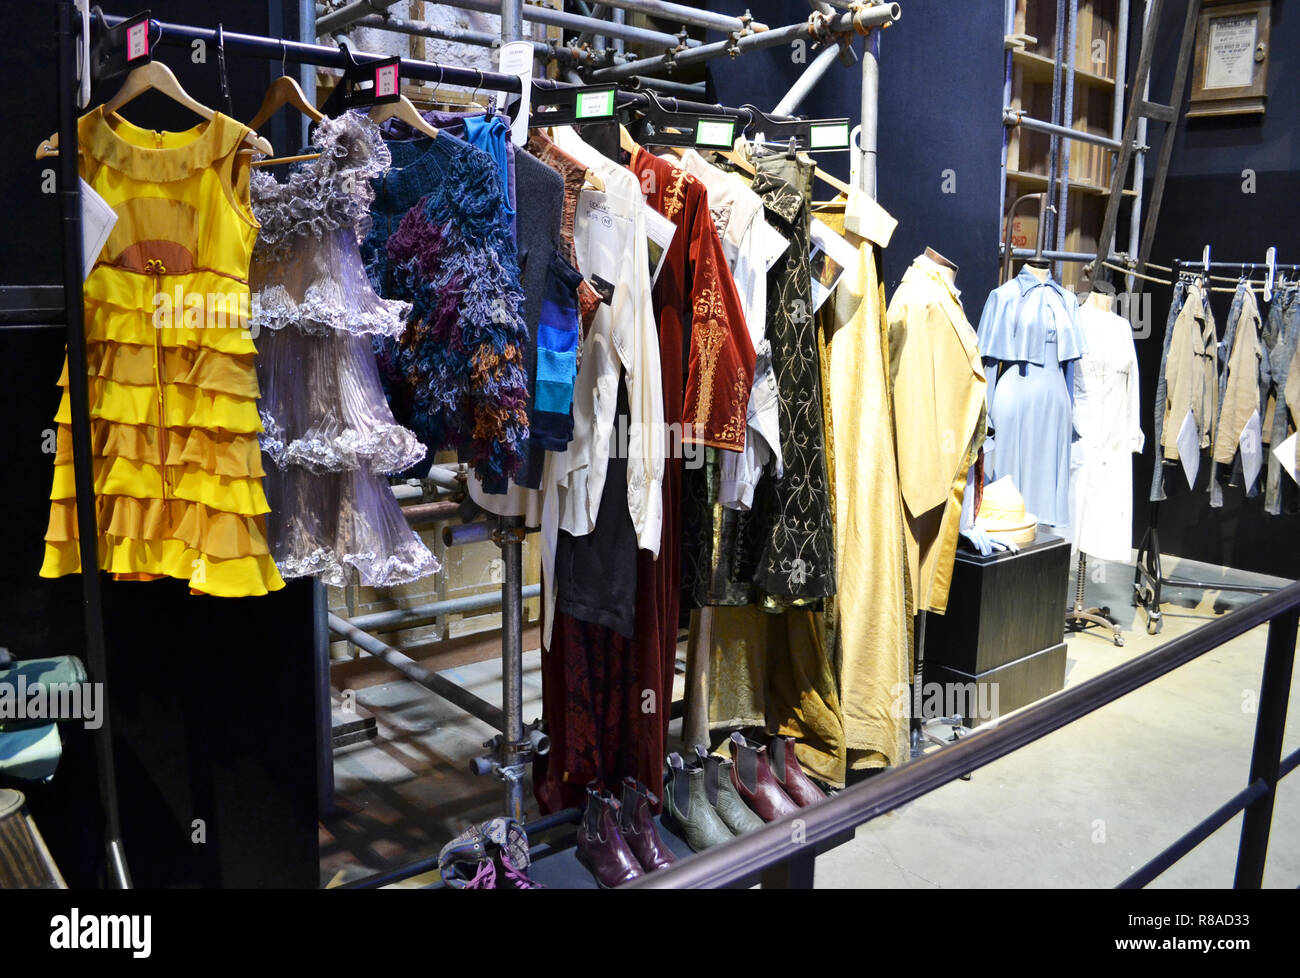 The wardrobe department at the Harry Potter Studios at Leavesden, London, UK Stock Photo